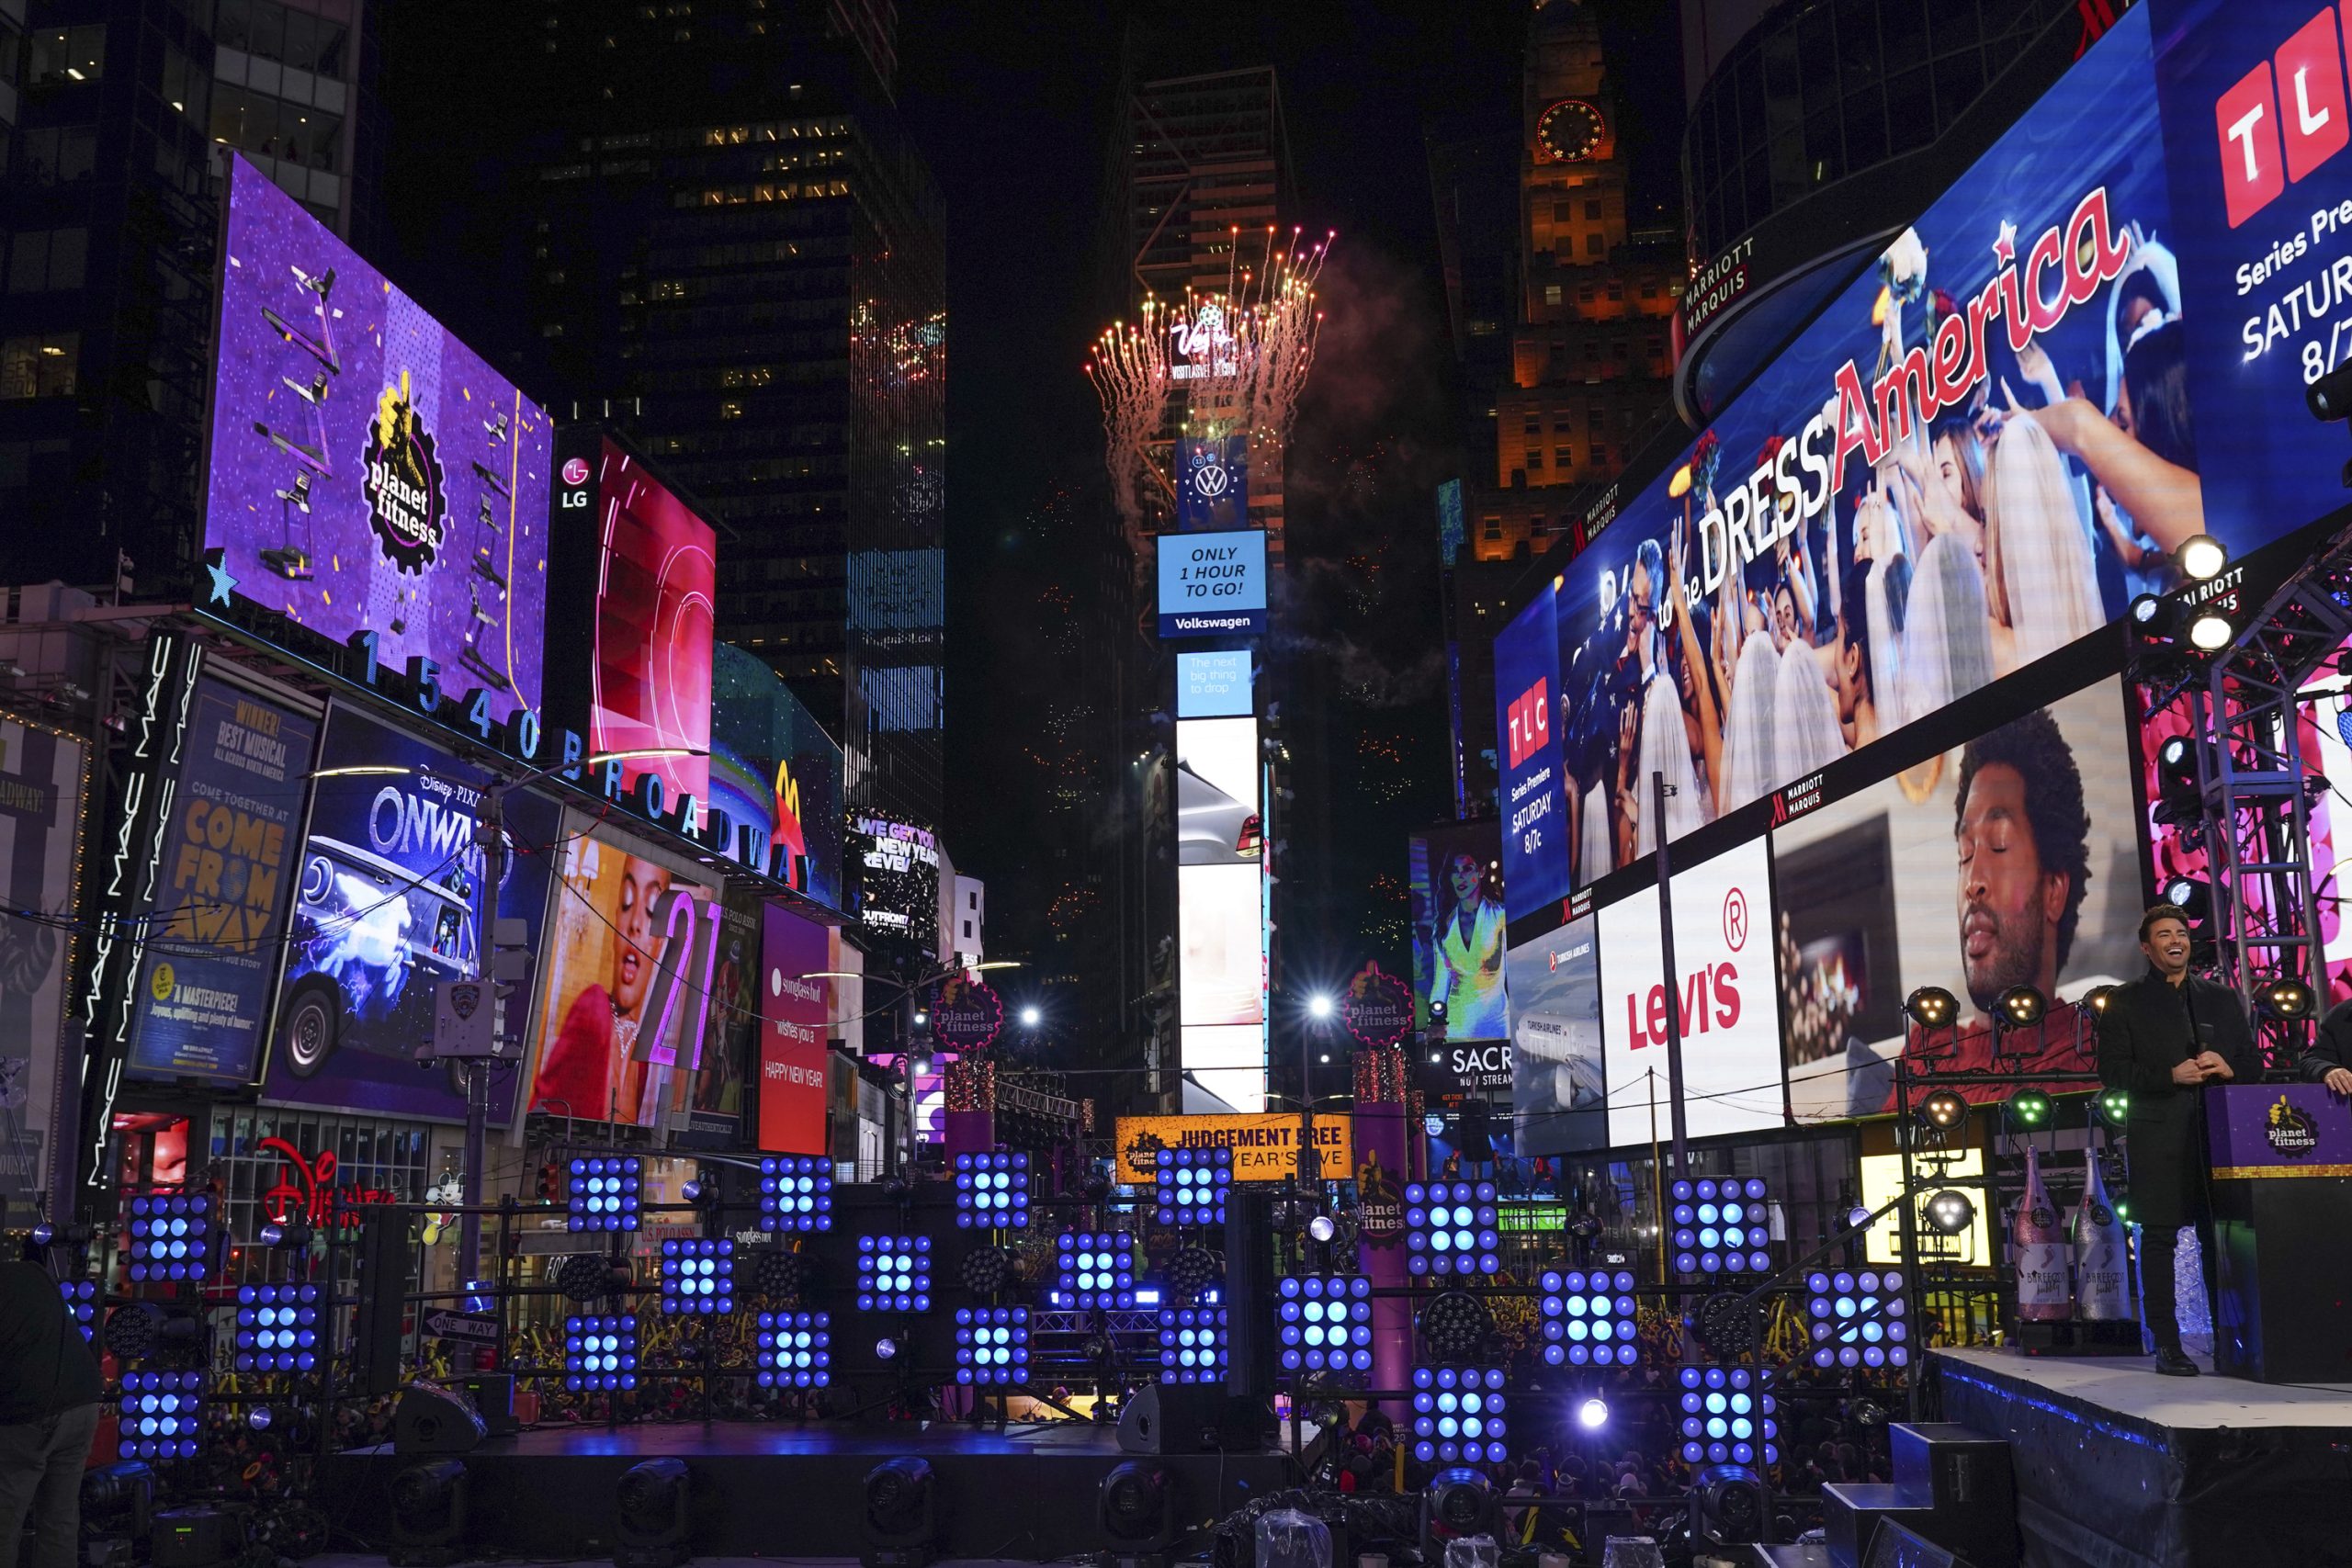 General overall view of Times Square New Year's Eve Celebration, Tuesday, Dec. 31, 2019, in New York. (John Nacion/Image of Sport via AP)